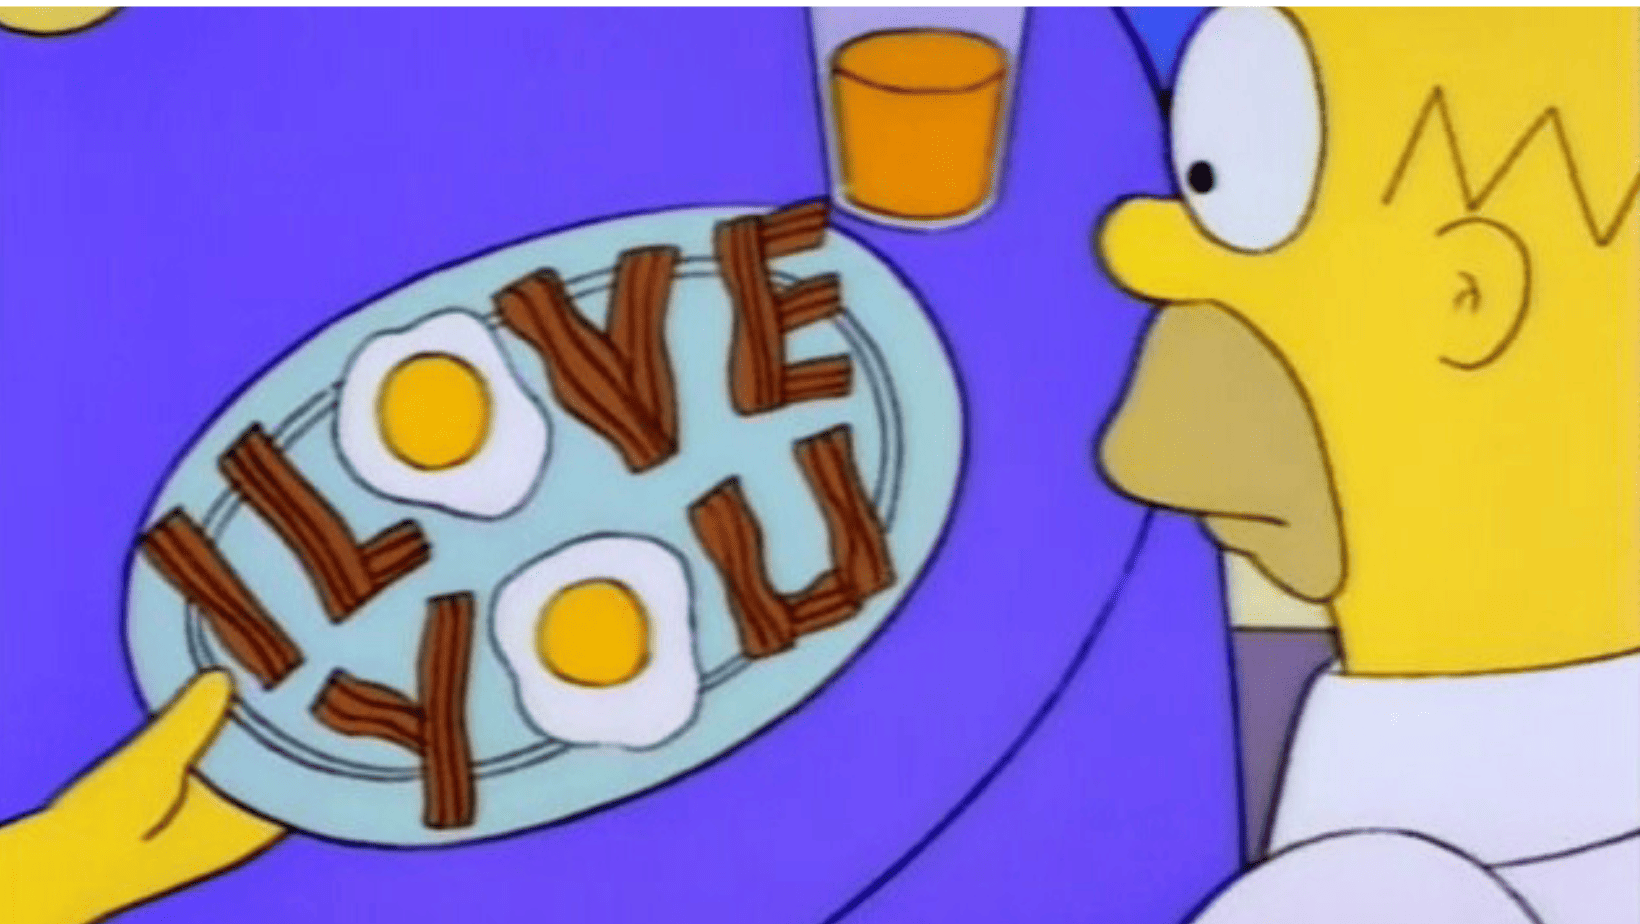 A plate of eggs and bacon spells “I Love You” in this image from Gracie Films.